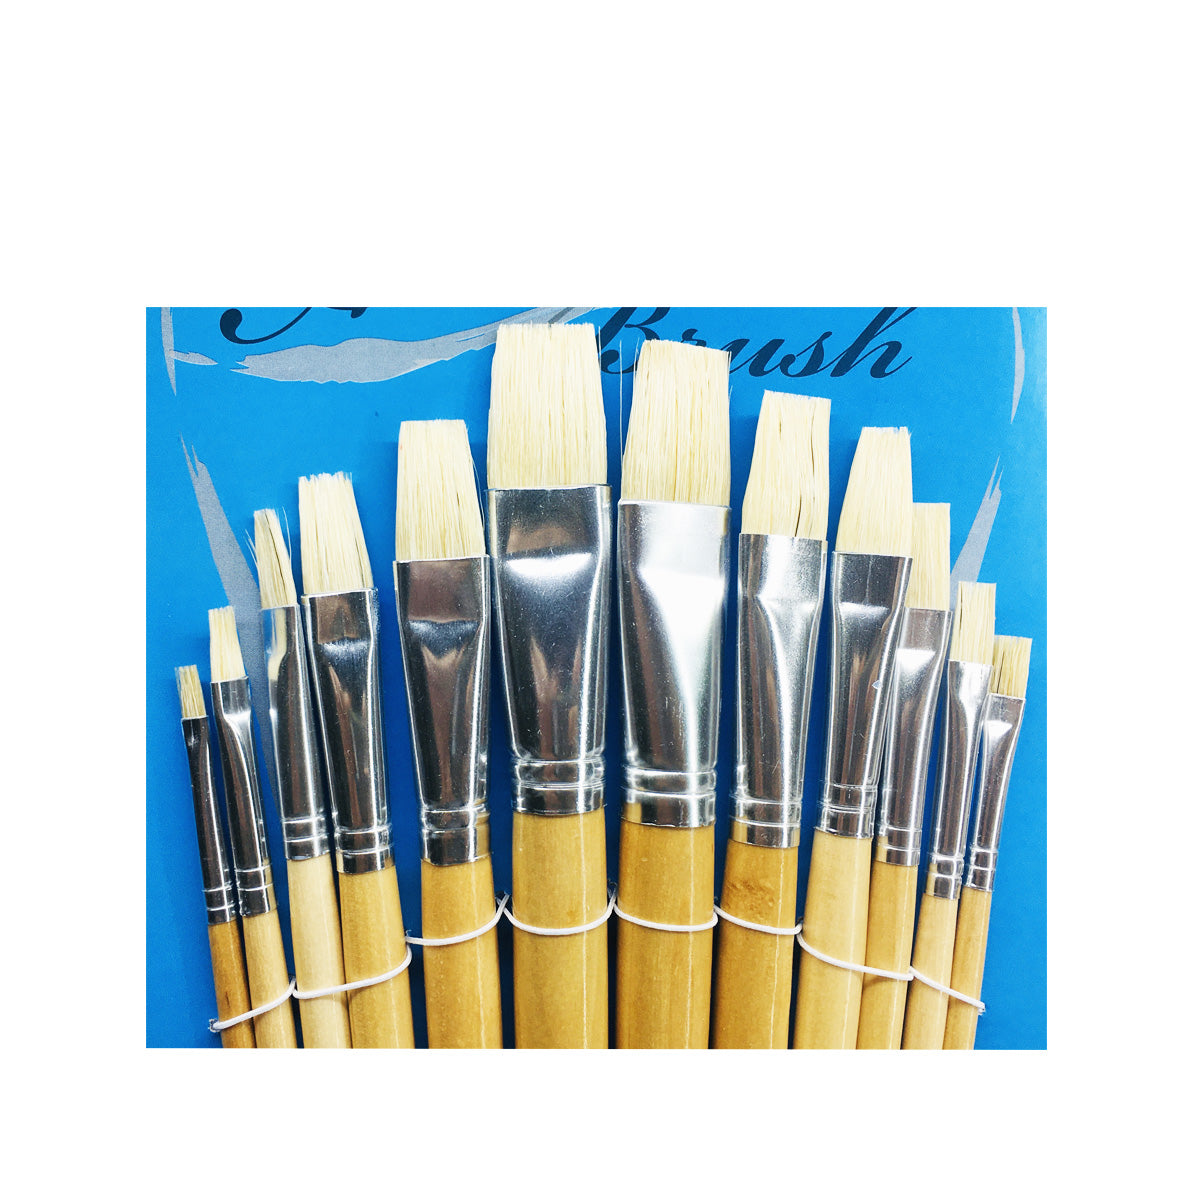 12 Shape Artist Brushes -Set of 12- WITH WOODEN HANDLE